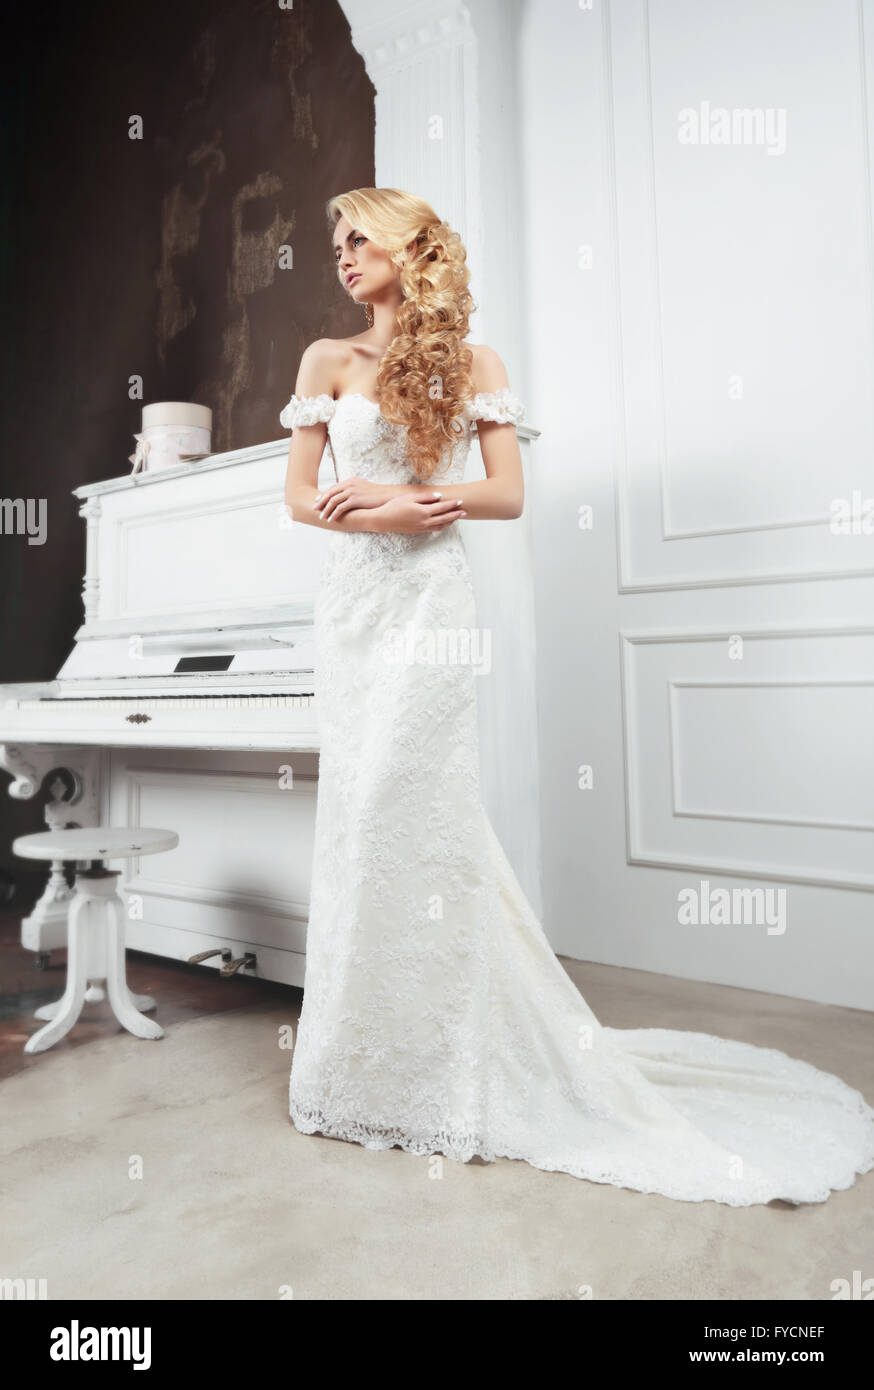 The bride in a long dress with a train. Long light hair. Wedding hairstyle. Stock Photo